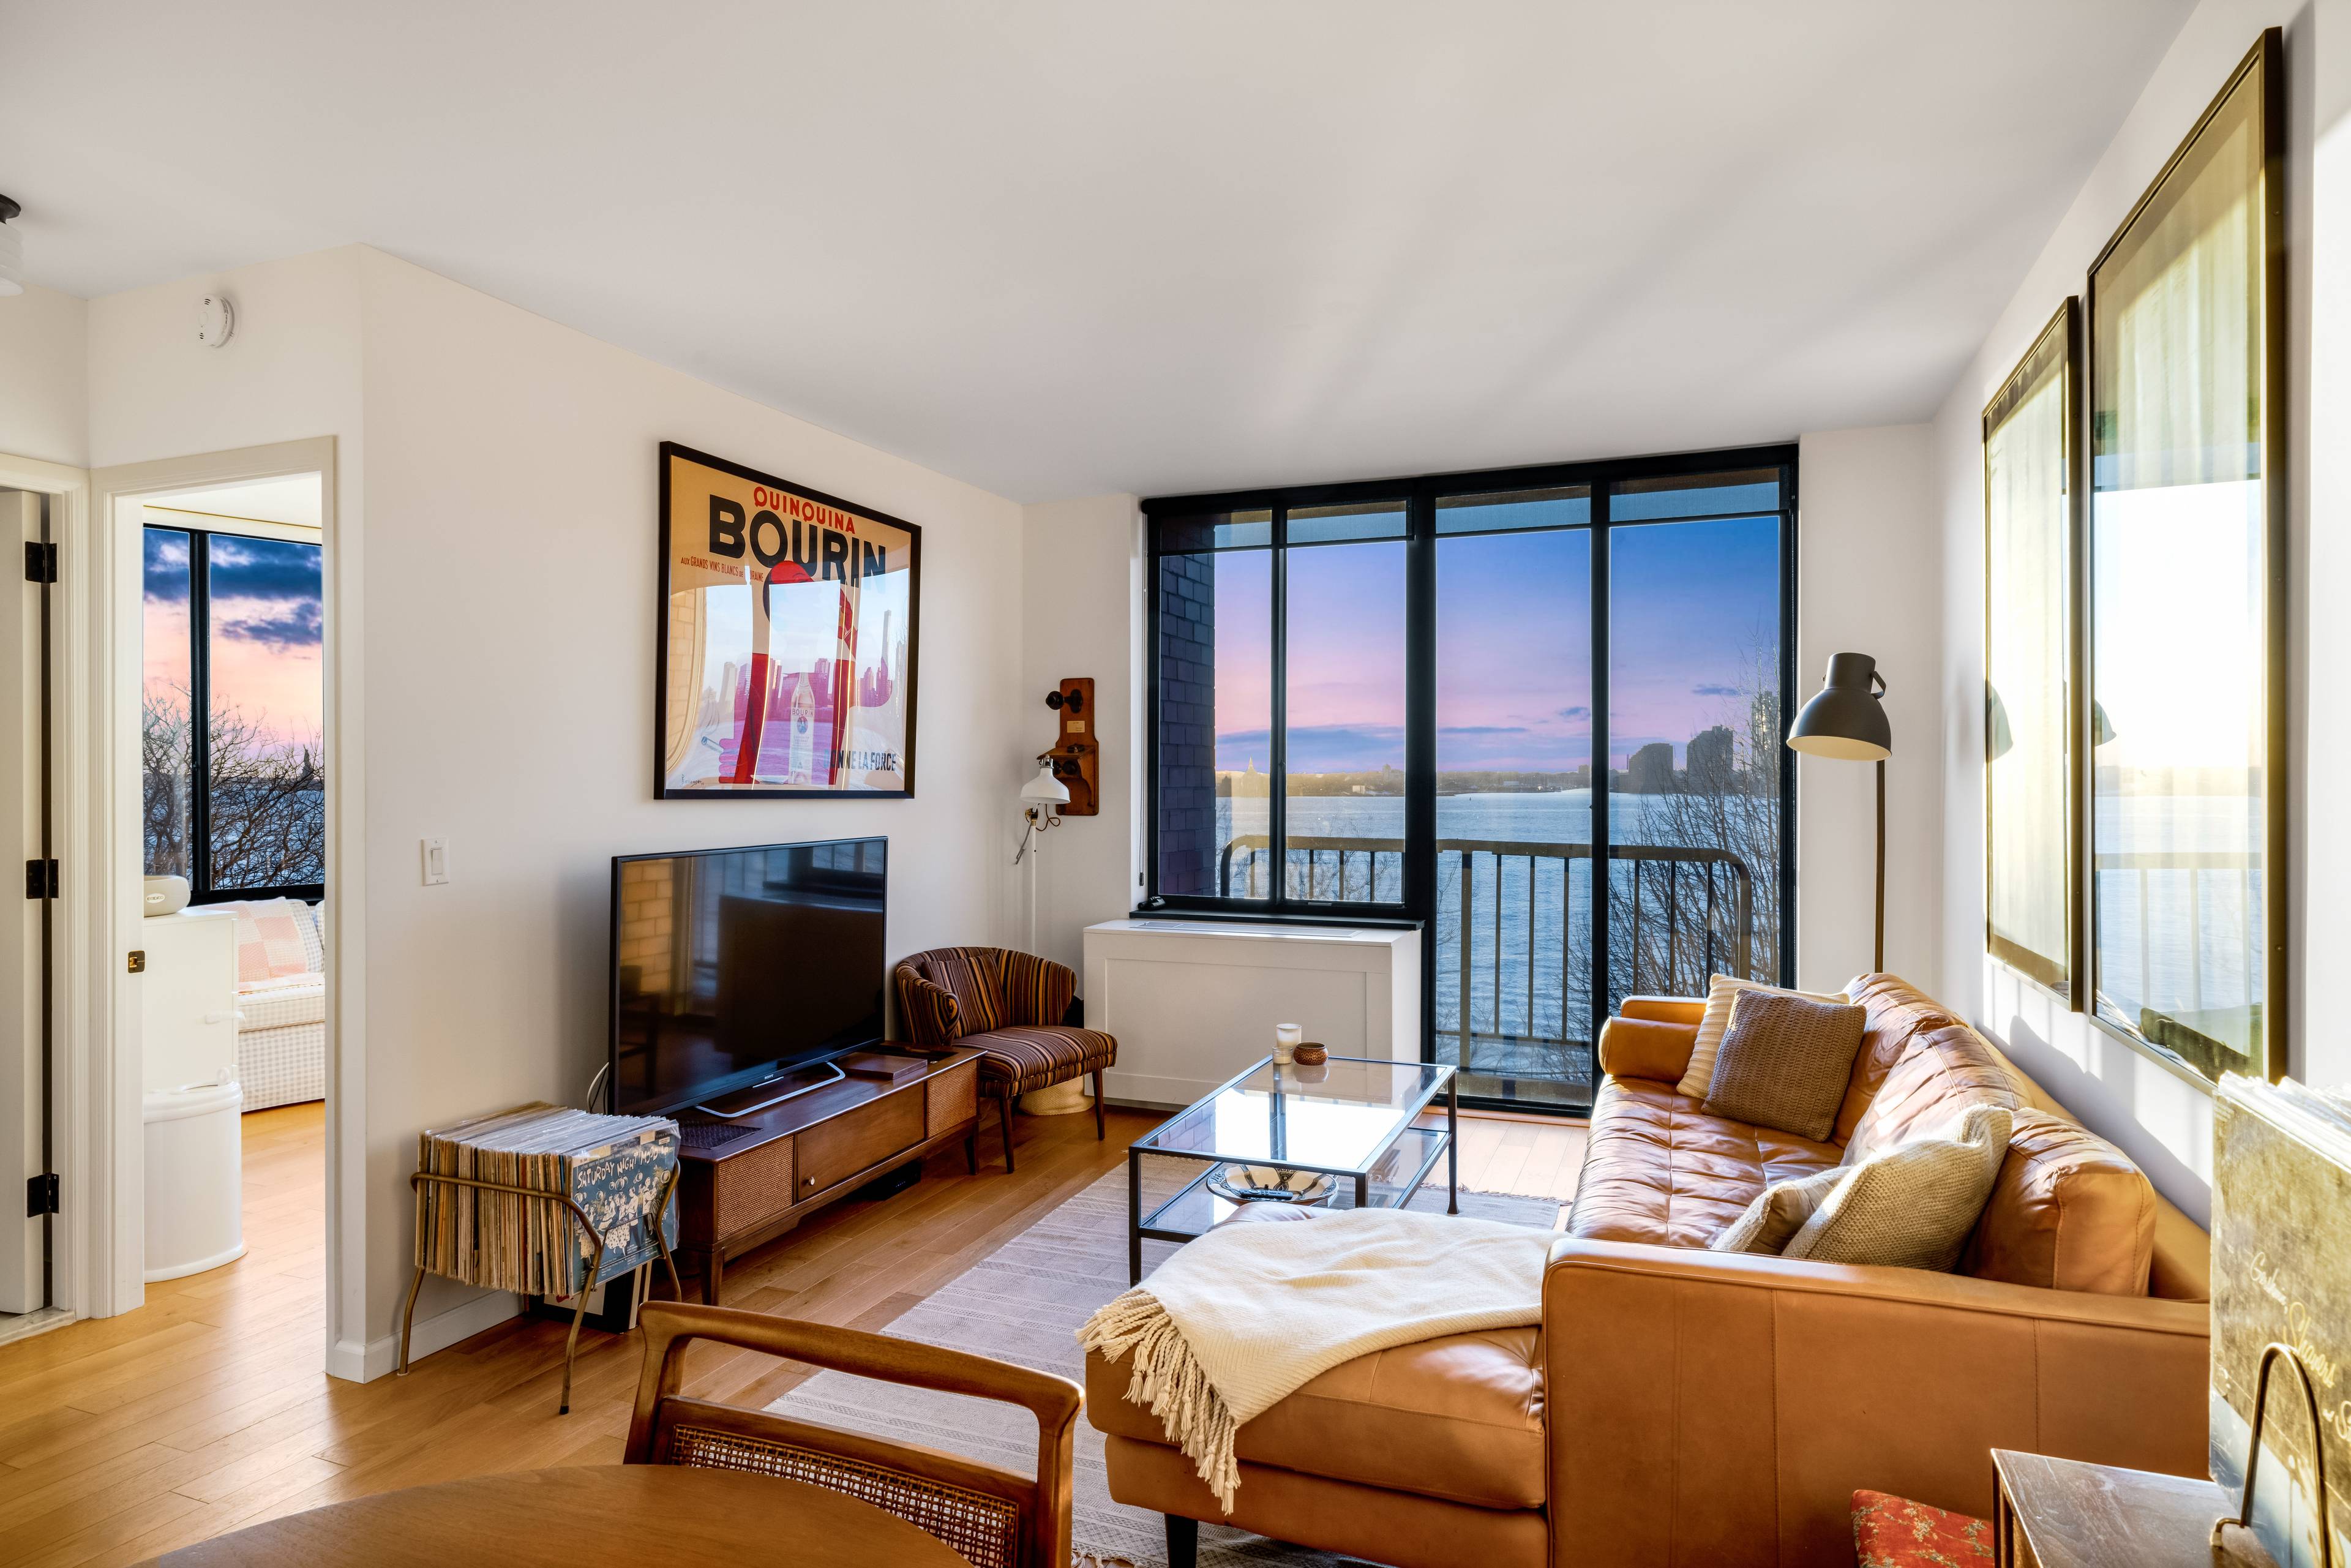 Impeccably designed and conceived light pours in through six massive windows in this exquisitely renovated, south and west facing corner apartment with Statue of Liberty and river views.